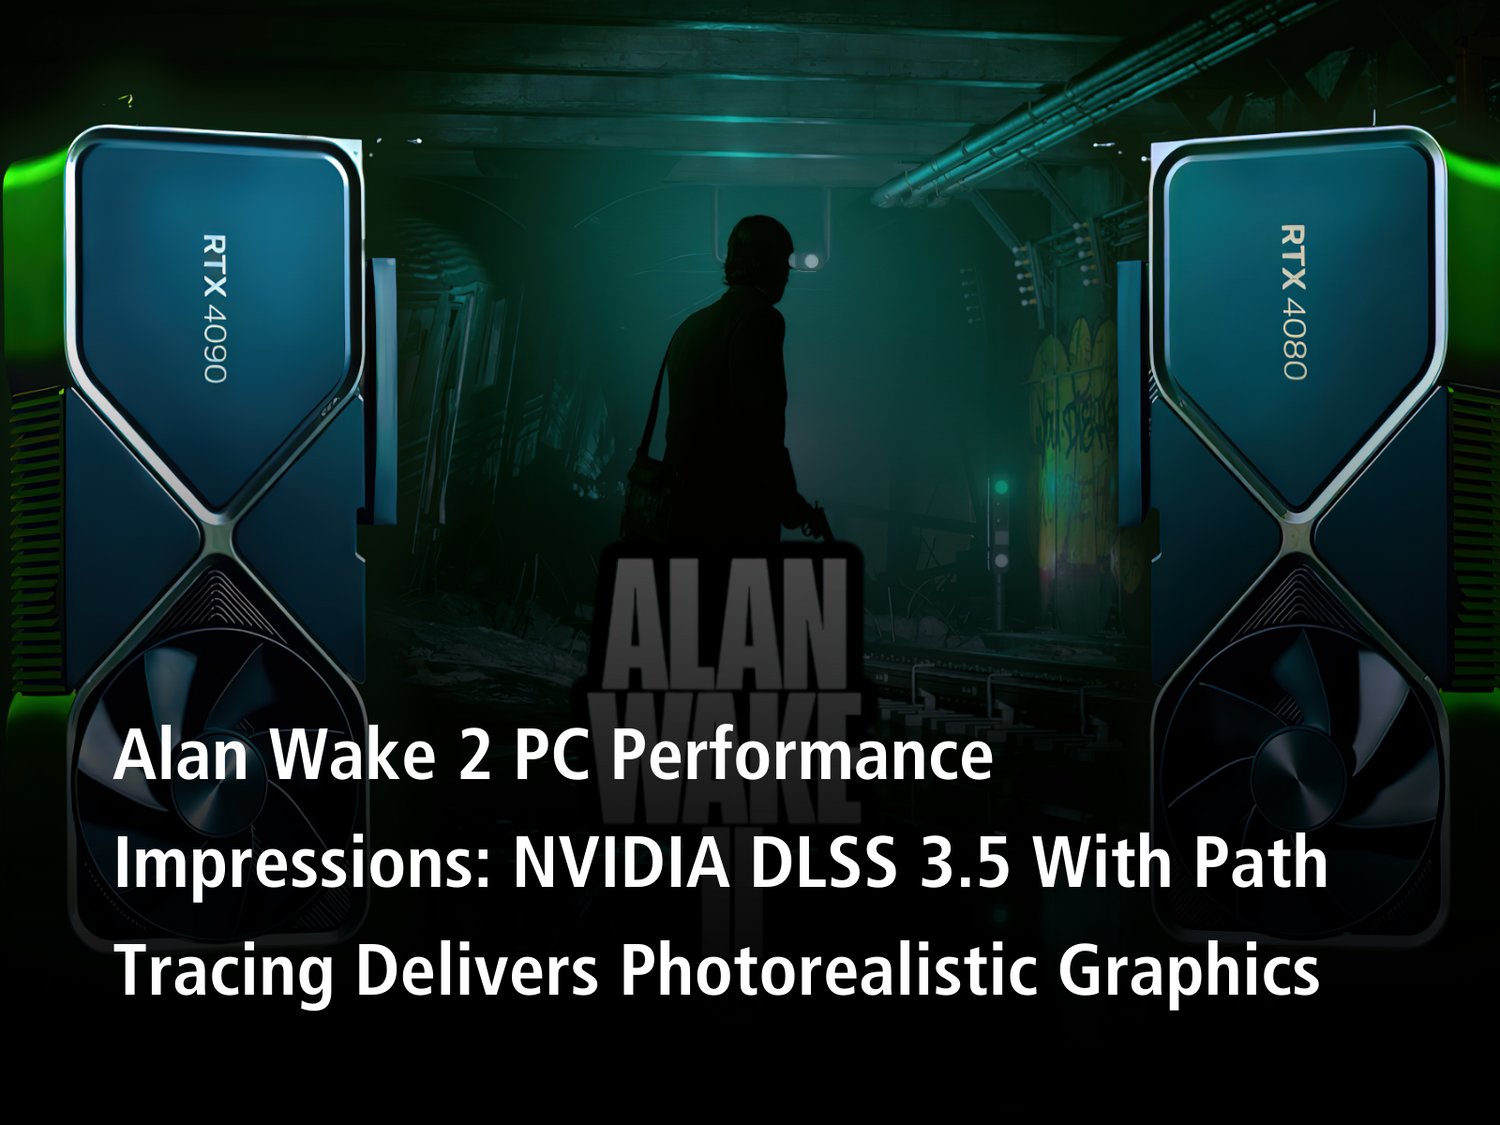 Alan Wake 2 - Official NVIDIA DLSS 3.5 and Full Ray Tracing